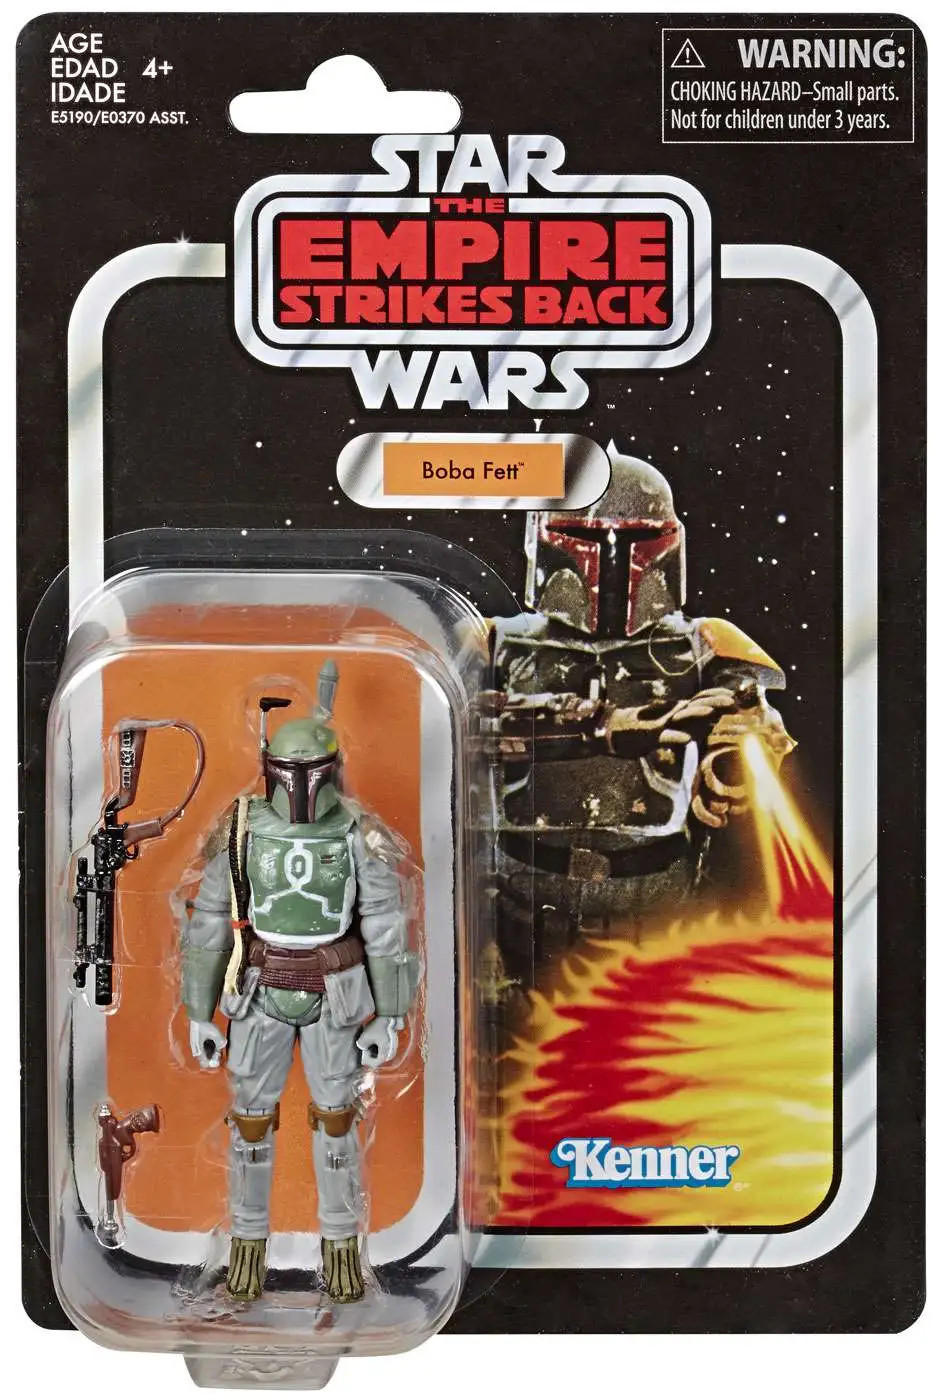 2020 Star Wars Retro Collection Wave 2 Boba Fett Kenner The Empire Strikes Back 